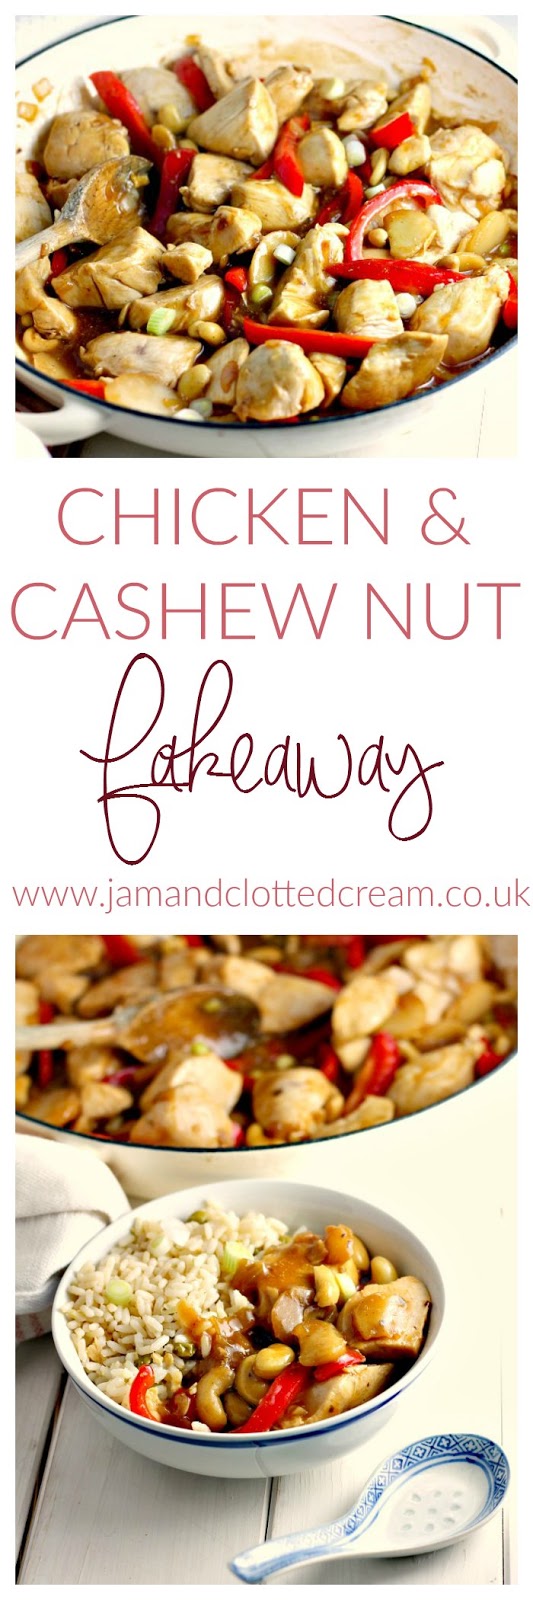 Chinese Chicken & Cashew Nuts - A Cornish Food Blog | Jam and Clotted Cream